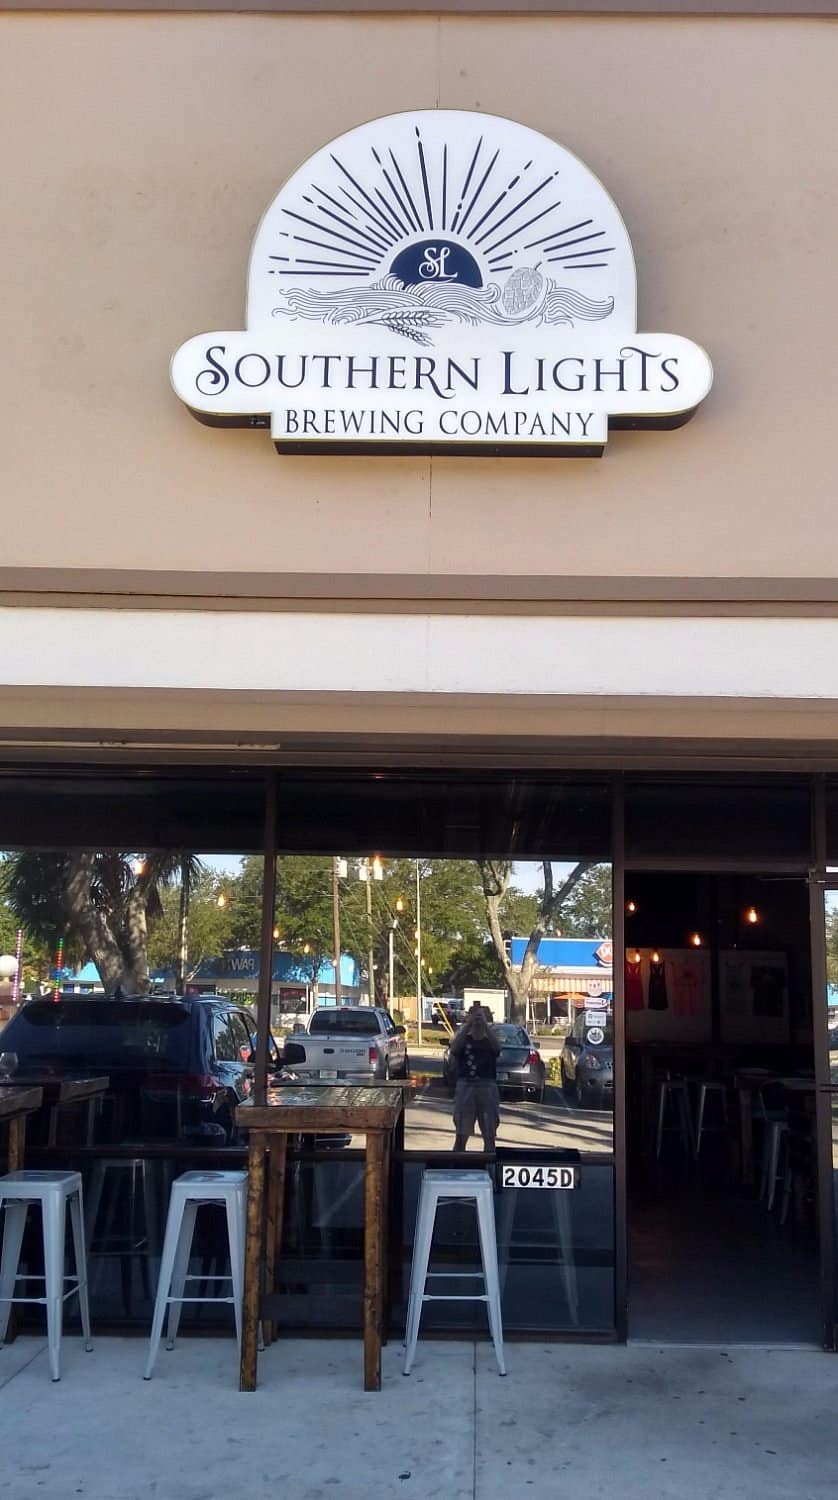 Southern Lights Brewing